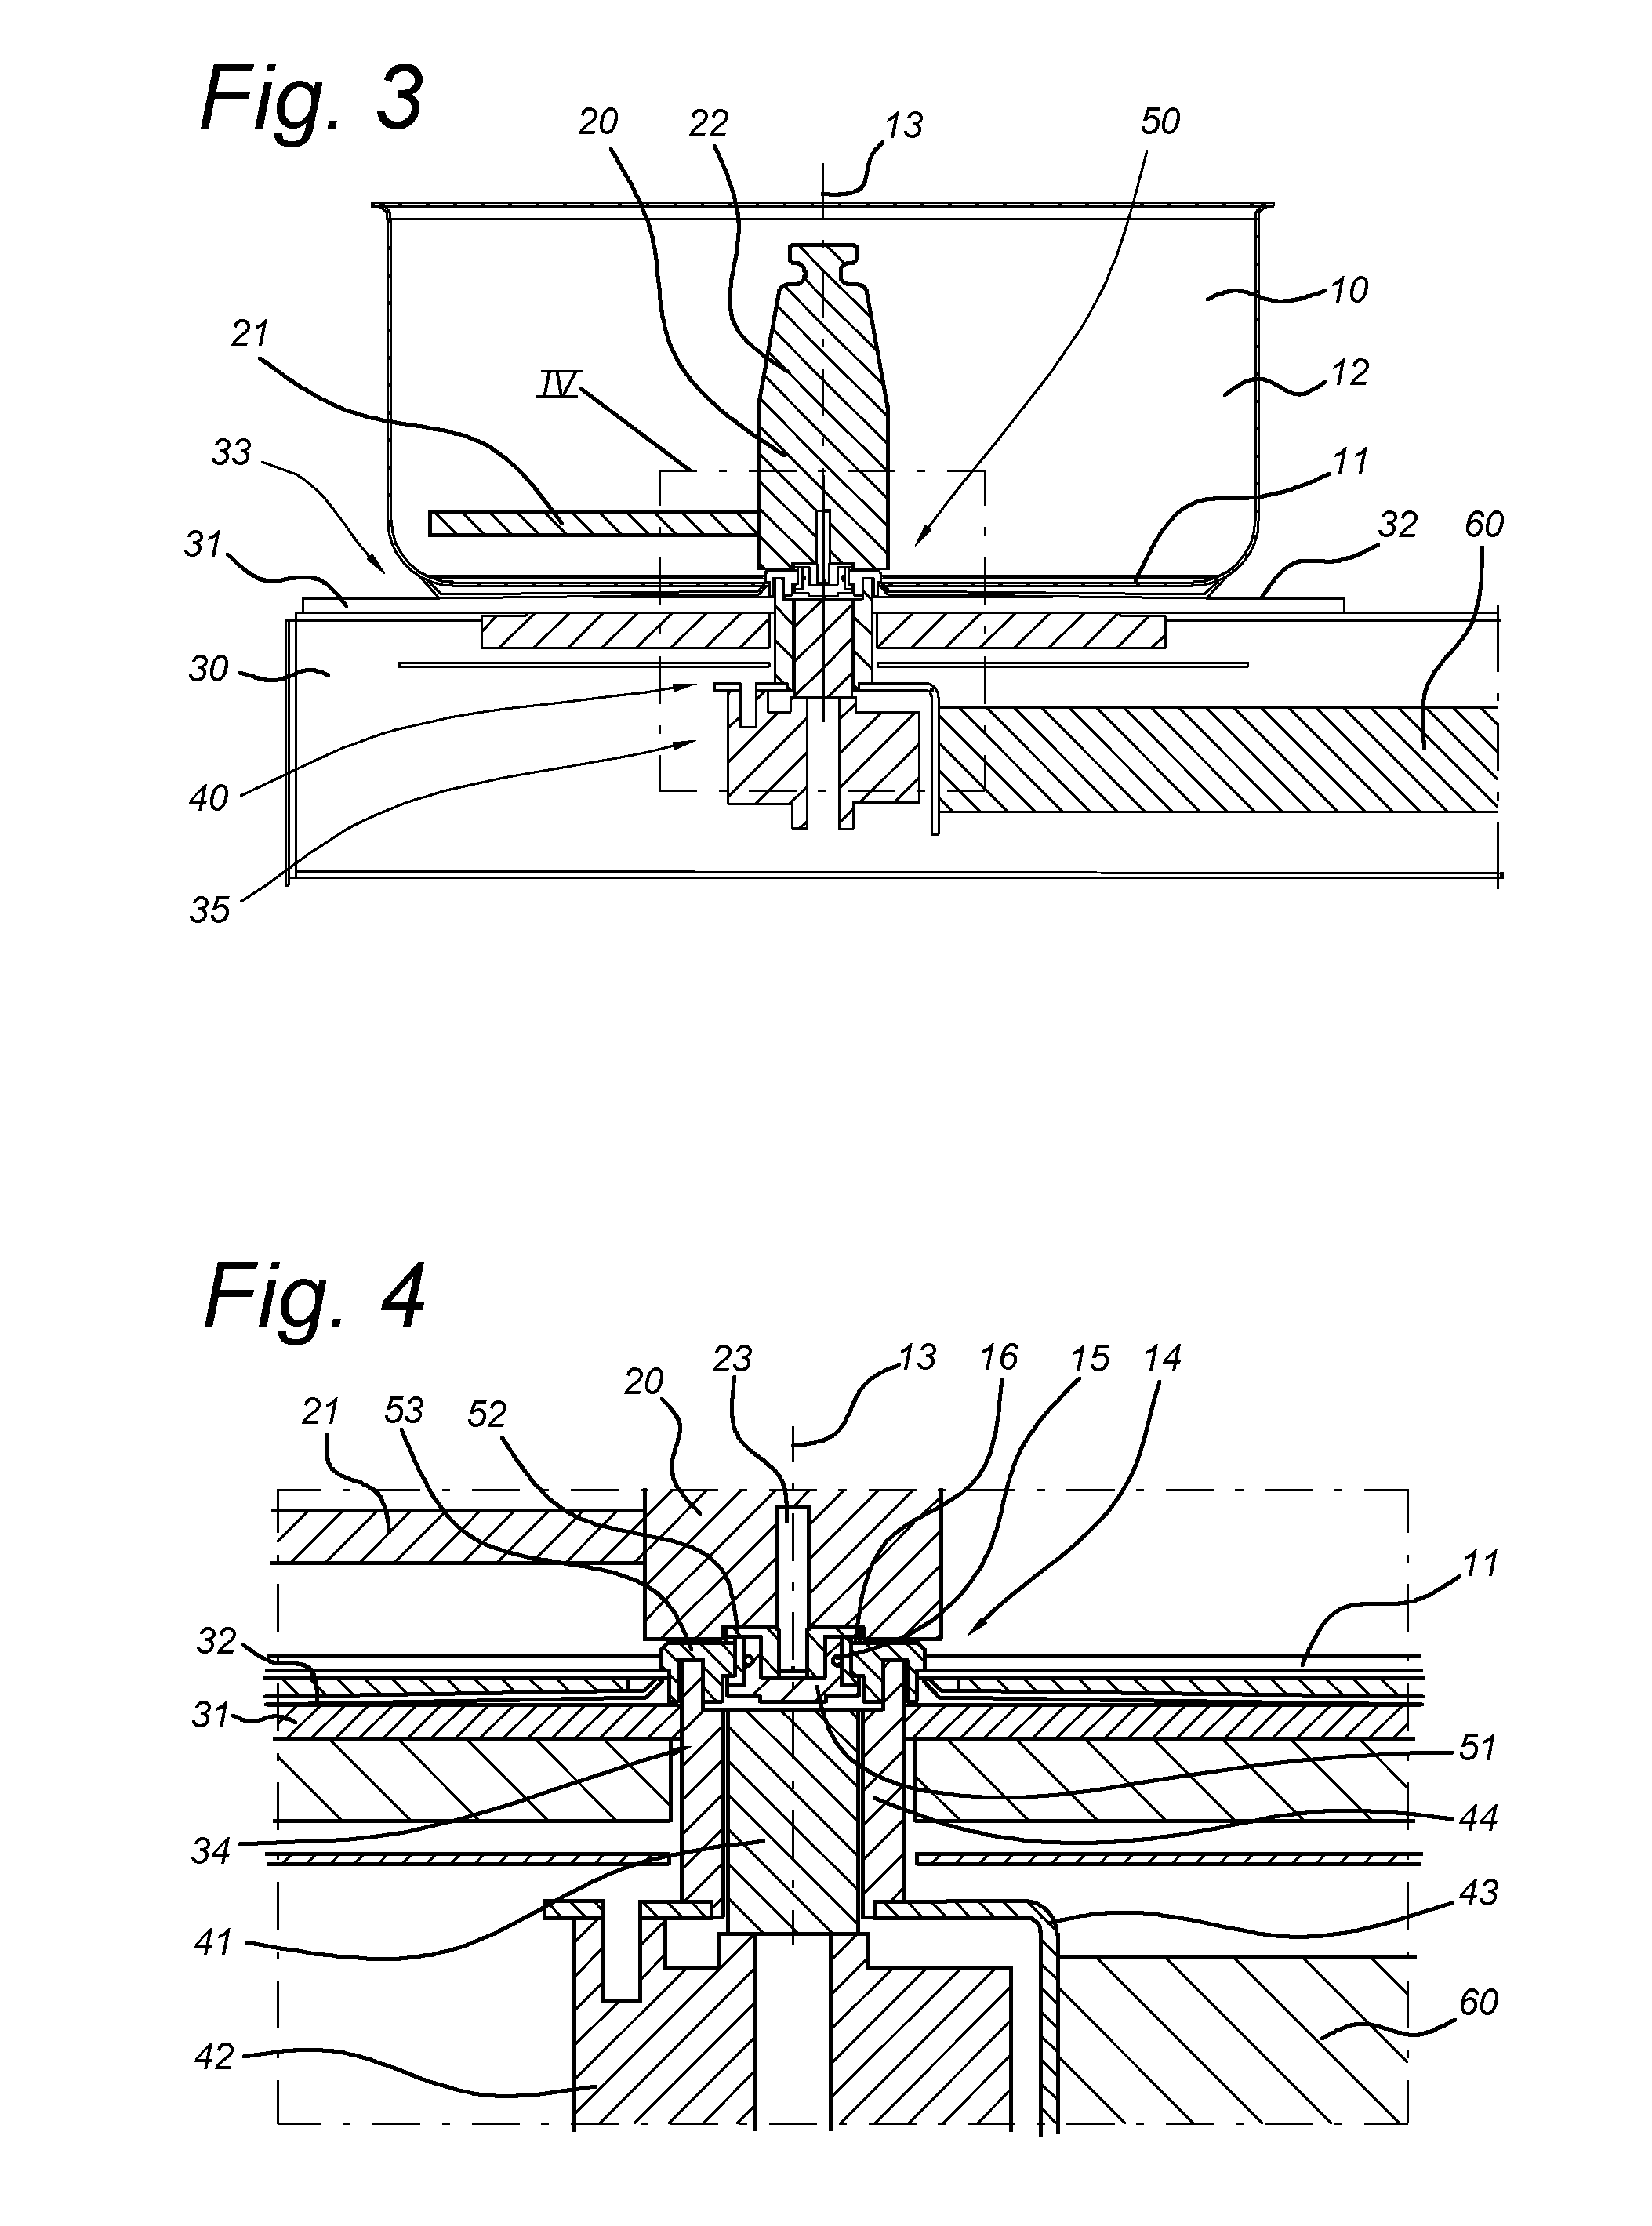 Cooking stove having a drive assembly for driving a food processing assembly in a pan